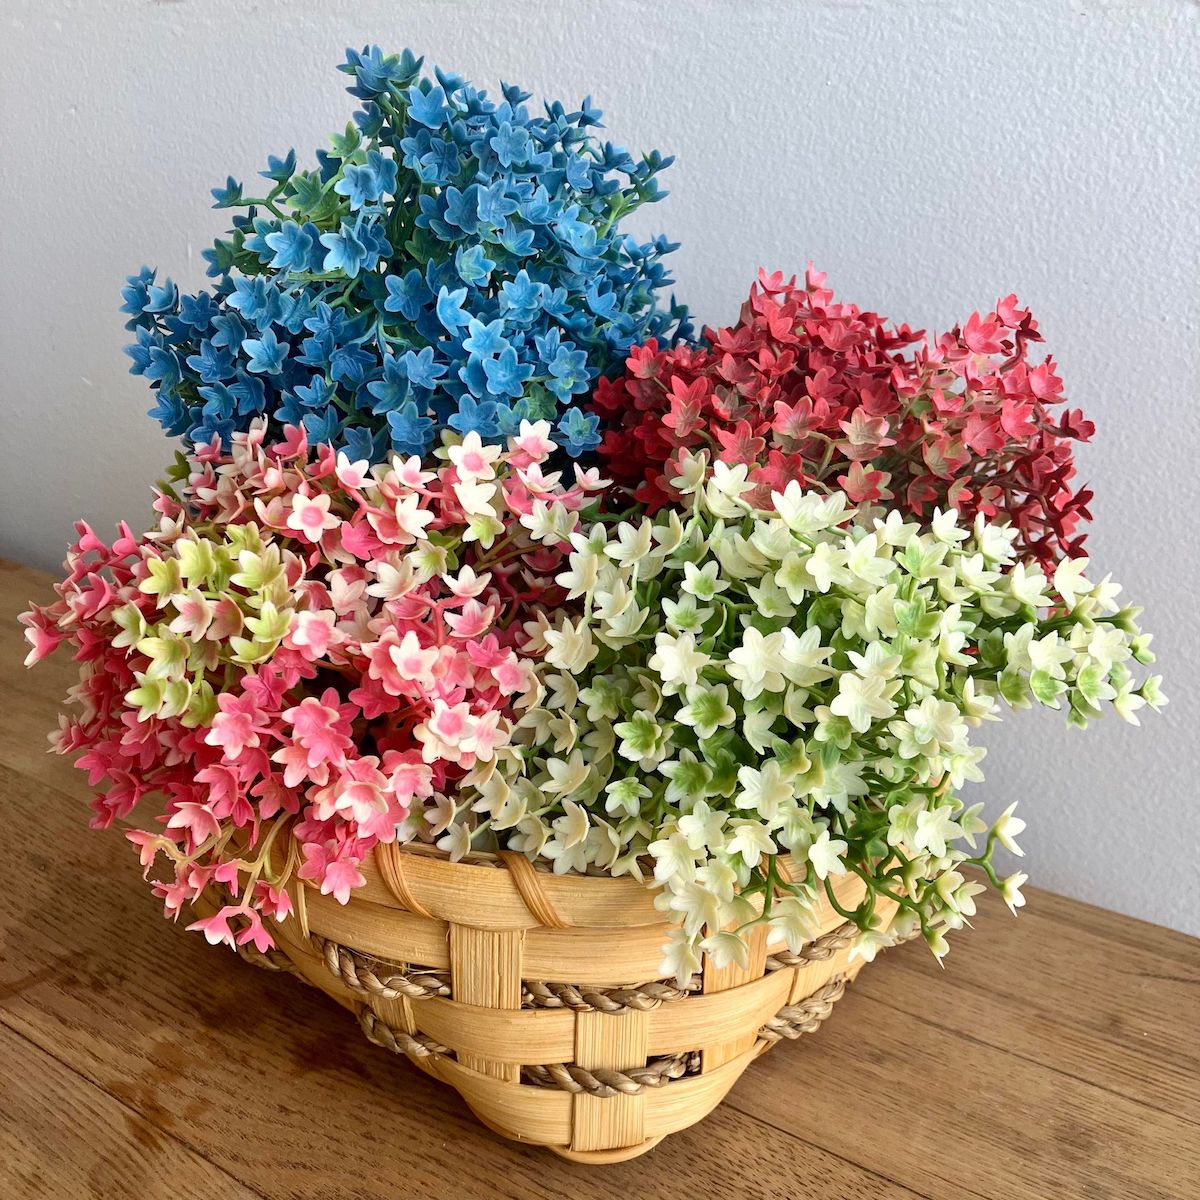 Blue, Pink, Red and Cream Andromeda Floral PIcks